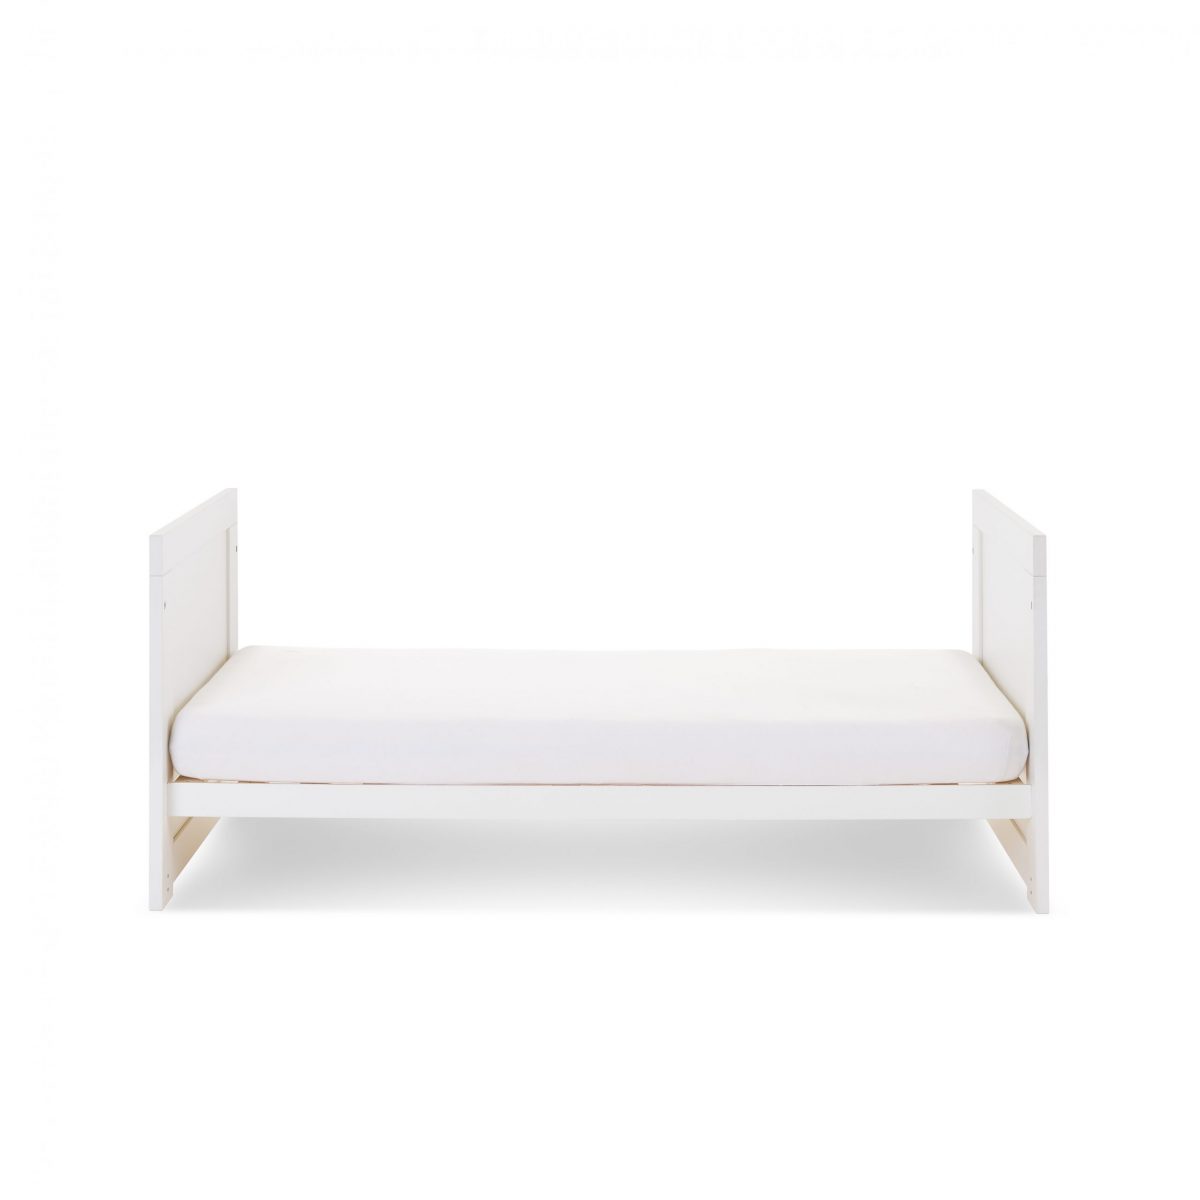 Obaby Nika Cot Bed - White Wash -  | For Your Little One